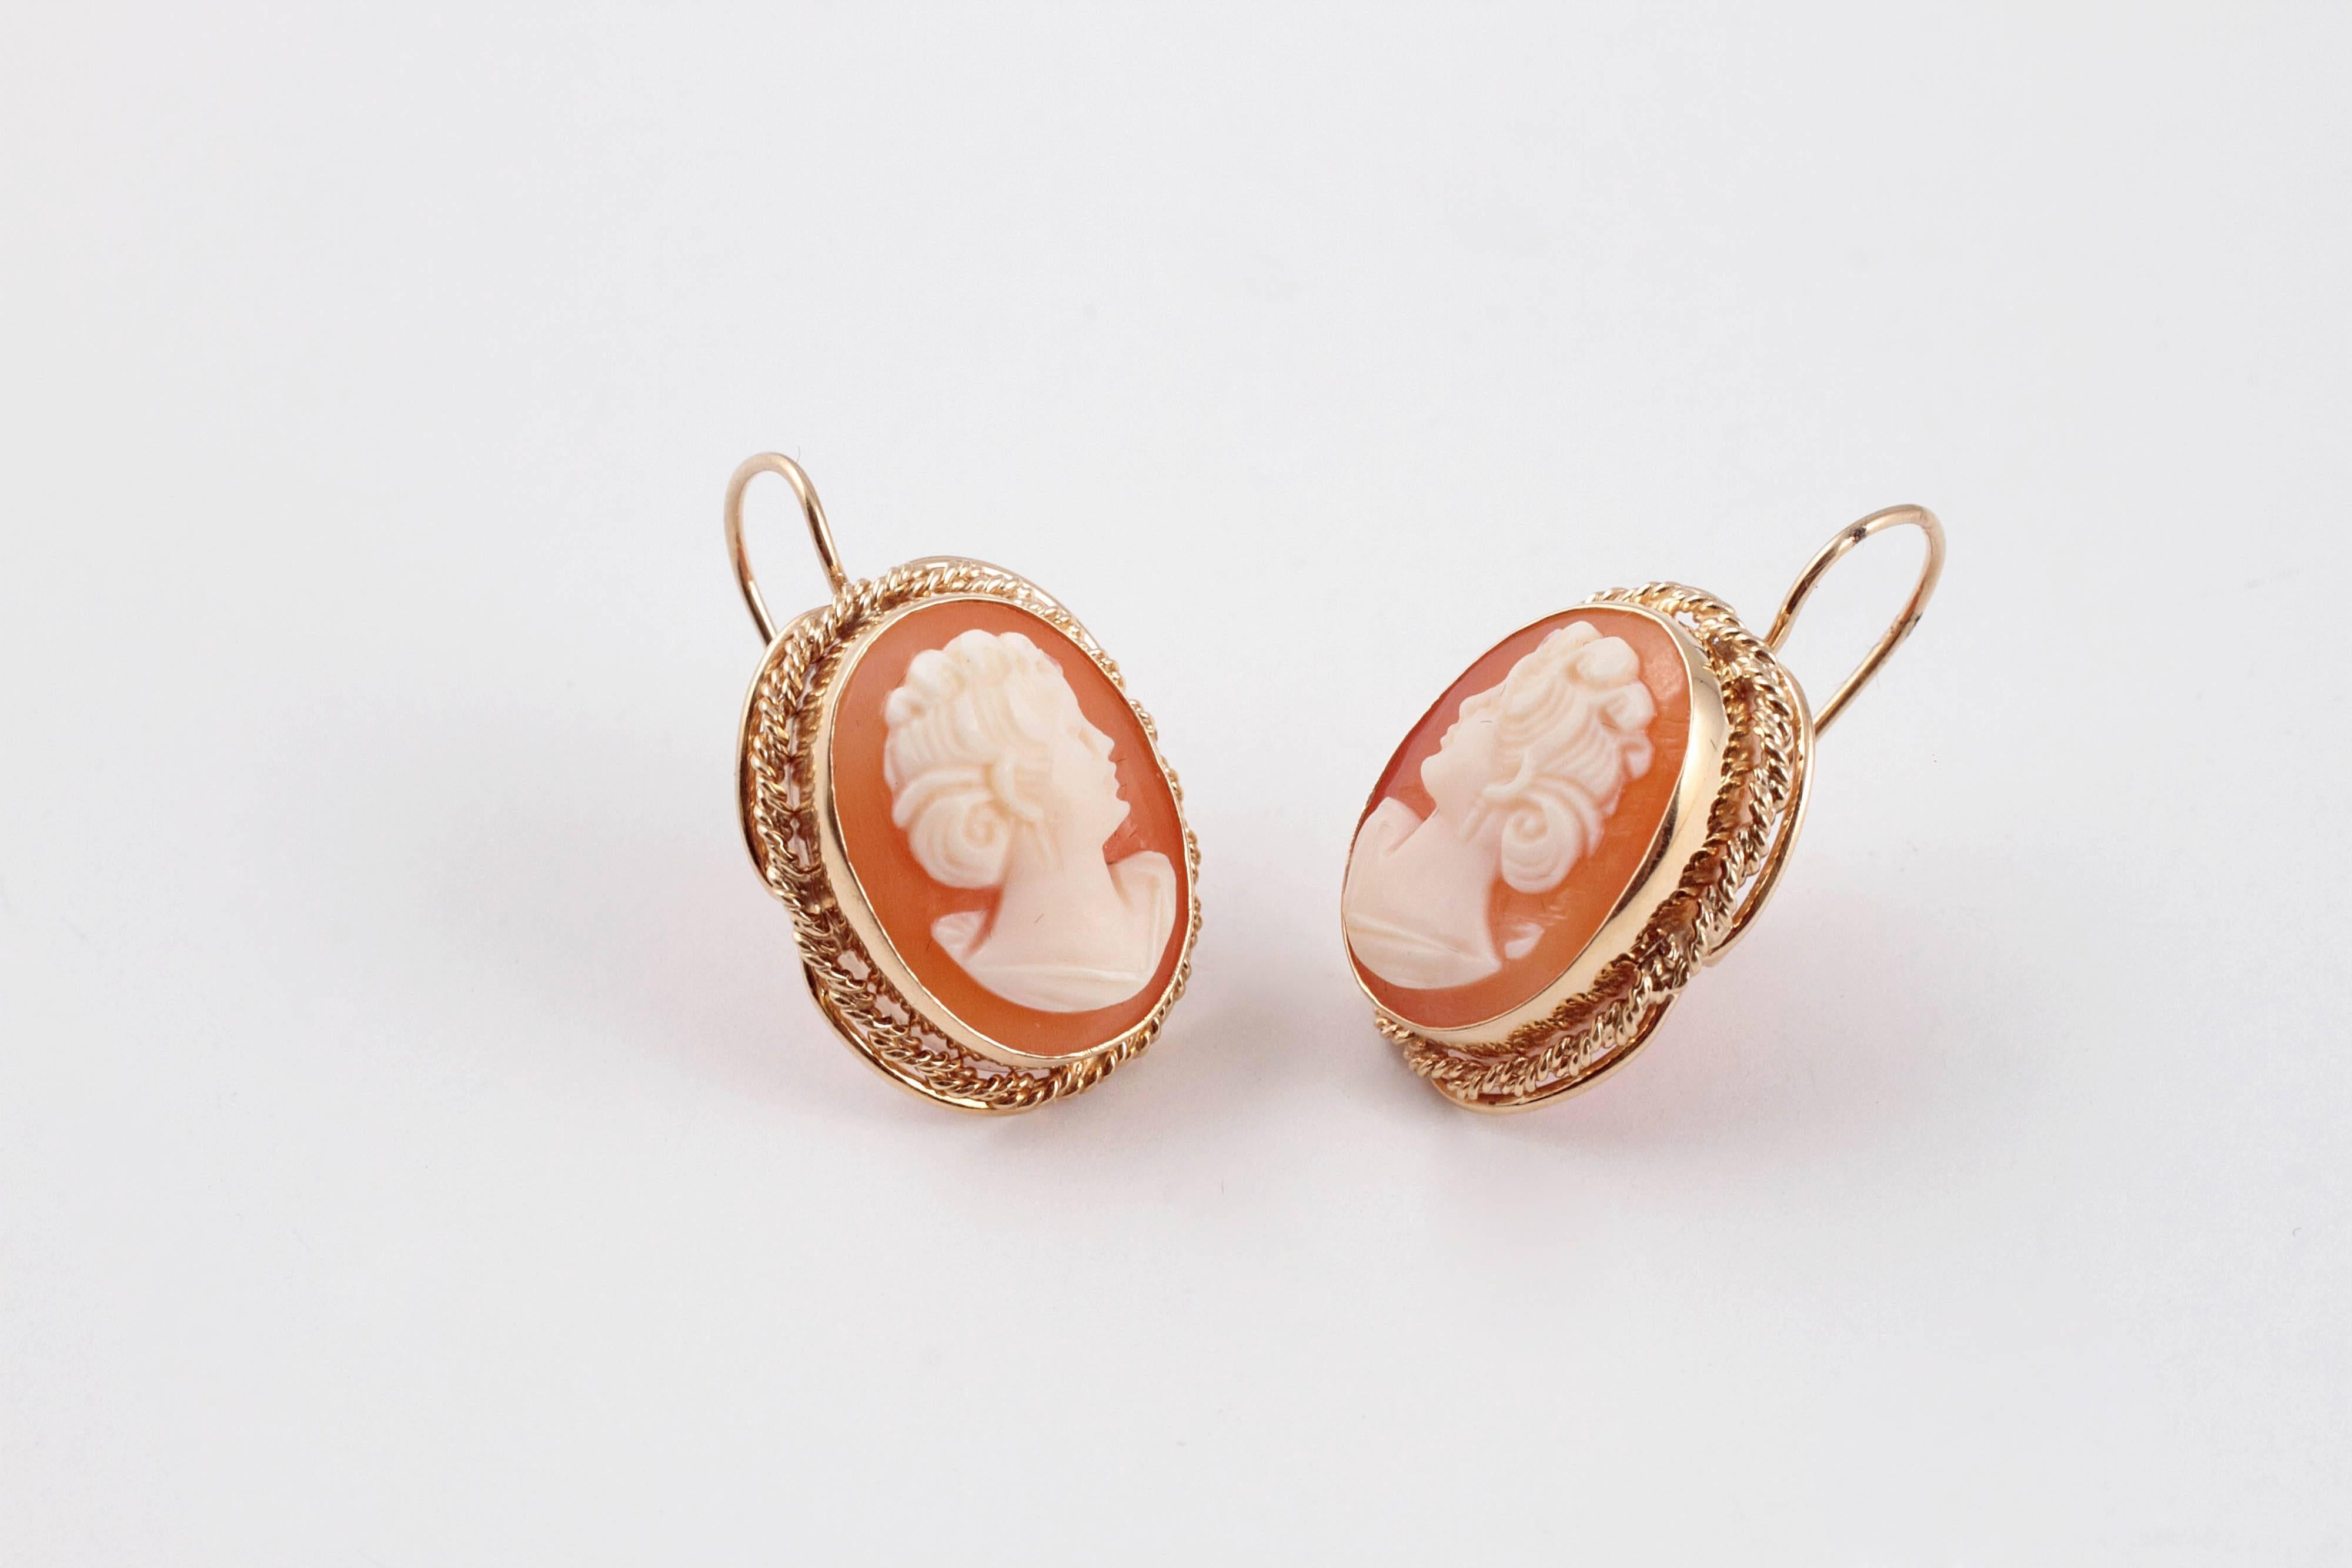 Shell cameos encased in a rope detailed 14 karat yellow gold frame, and suspended by euro wire.